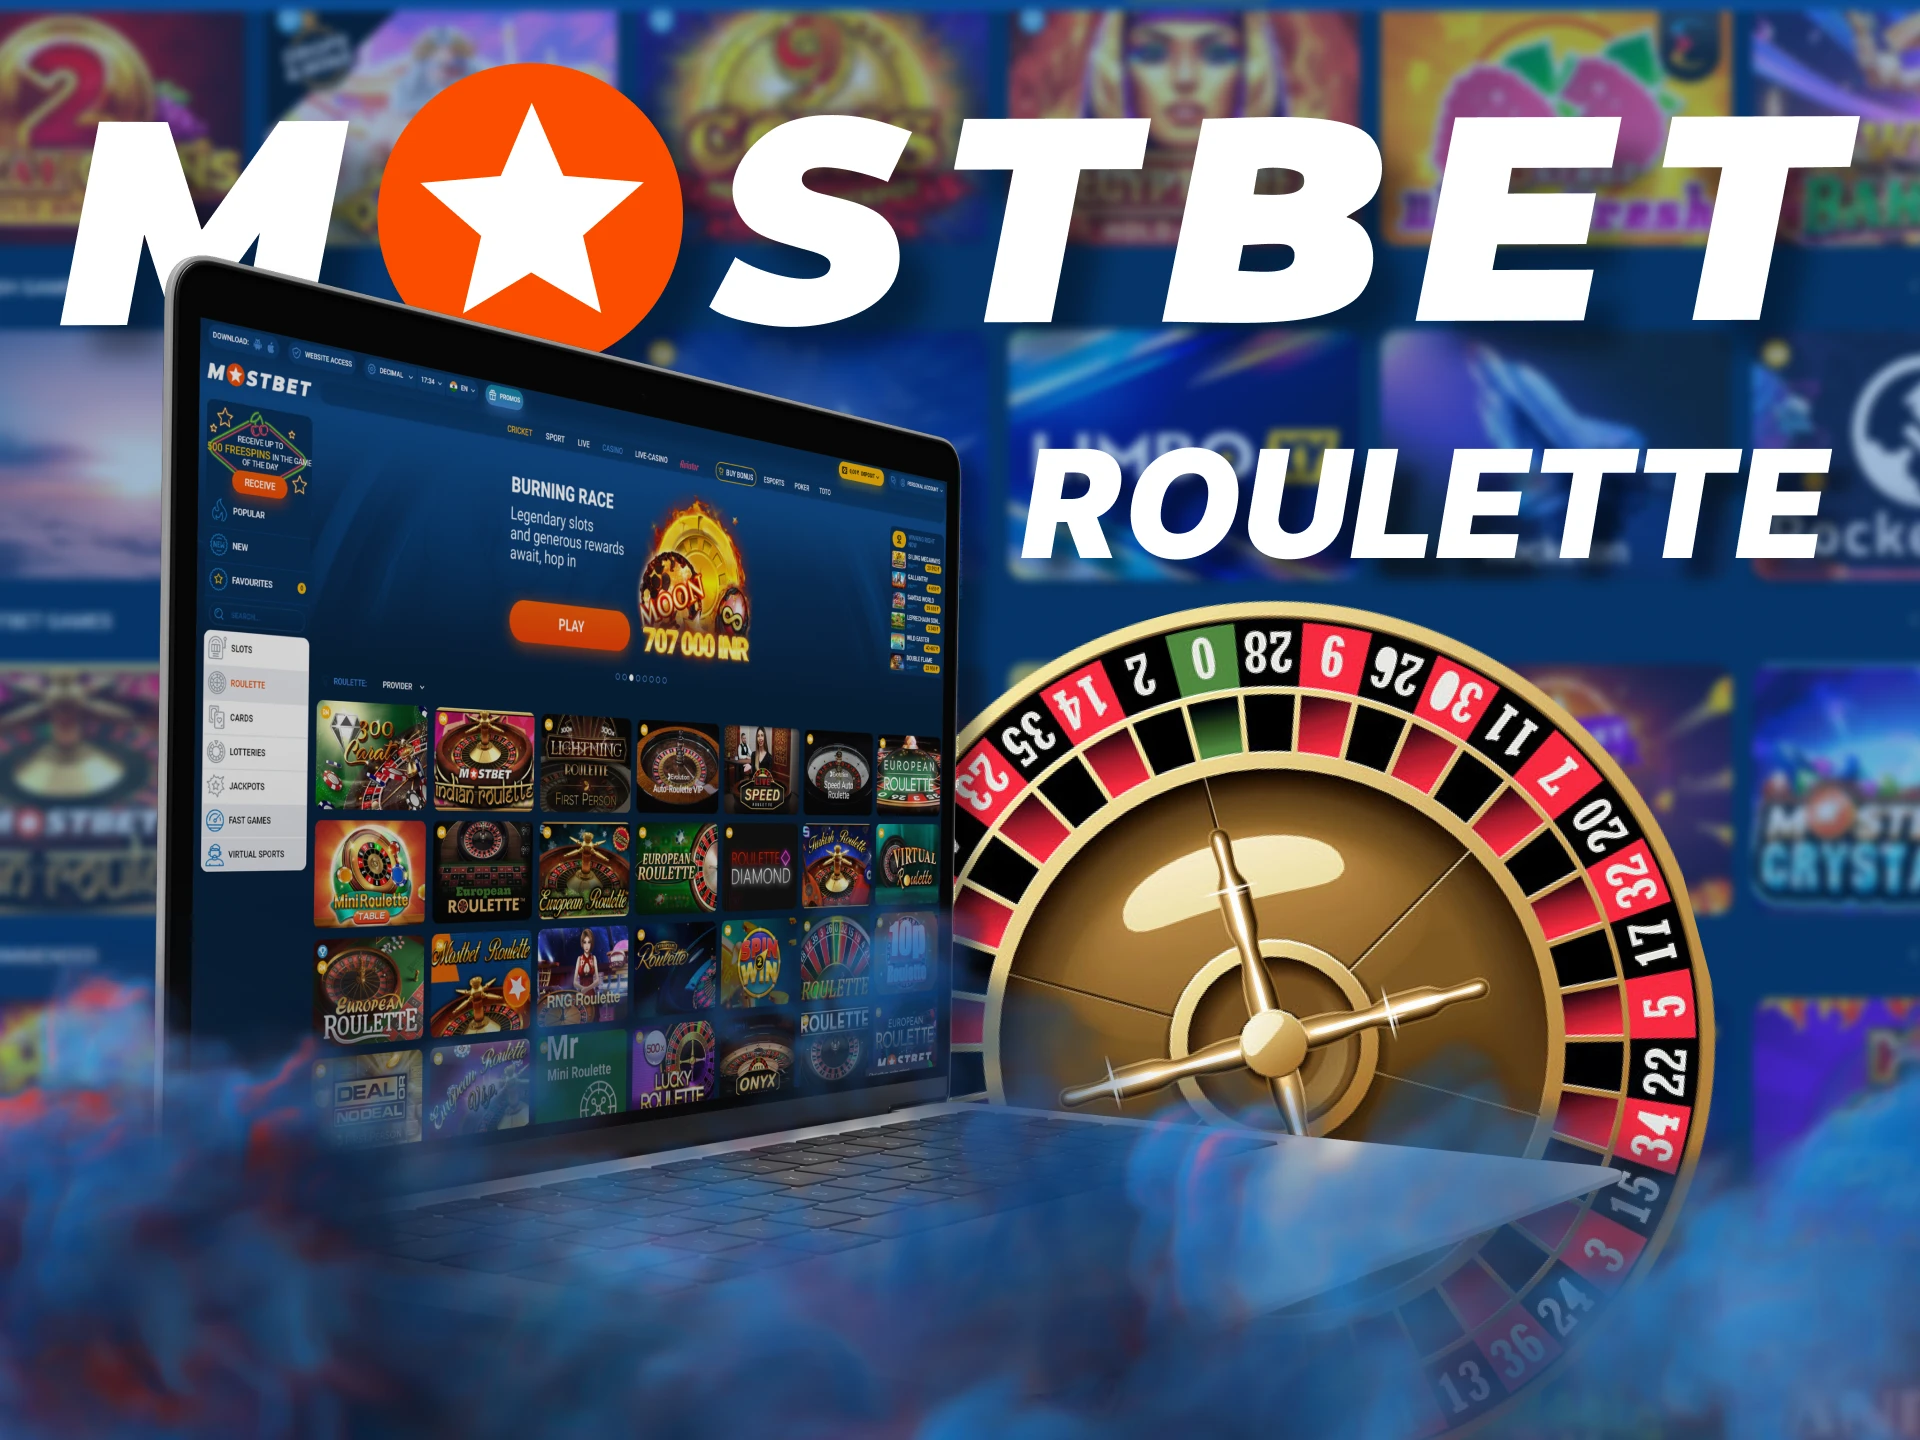 Play roulette with Mostbet Casino.